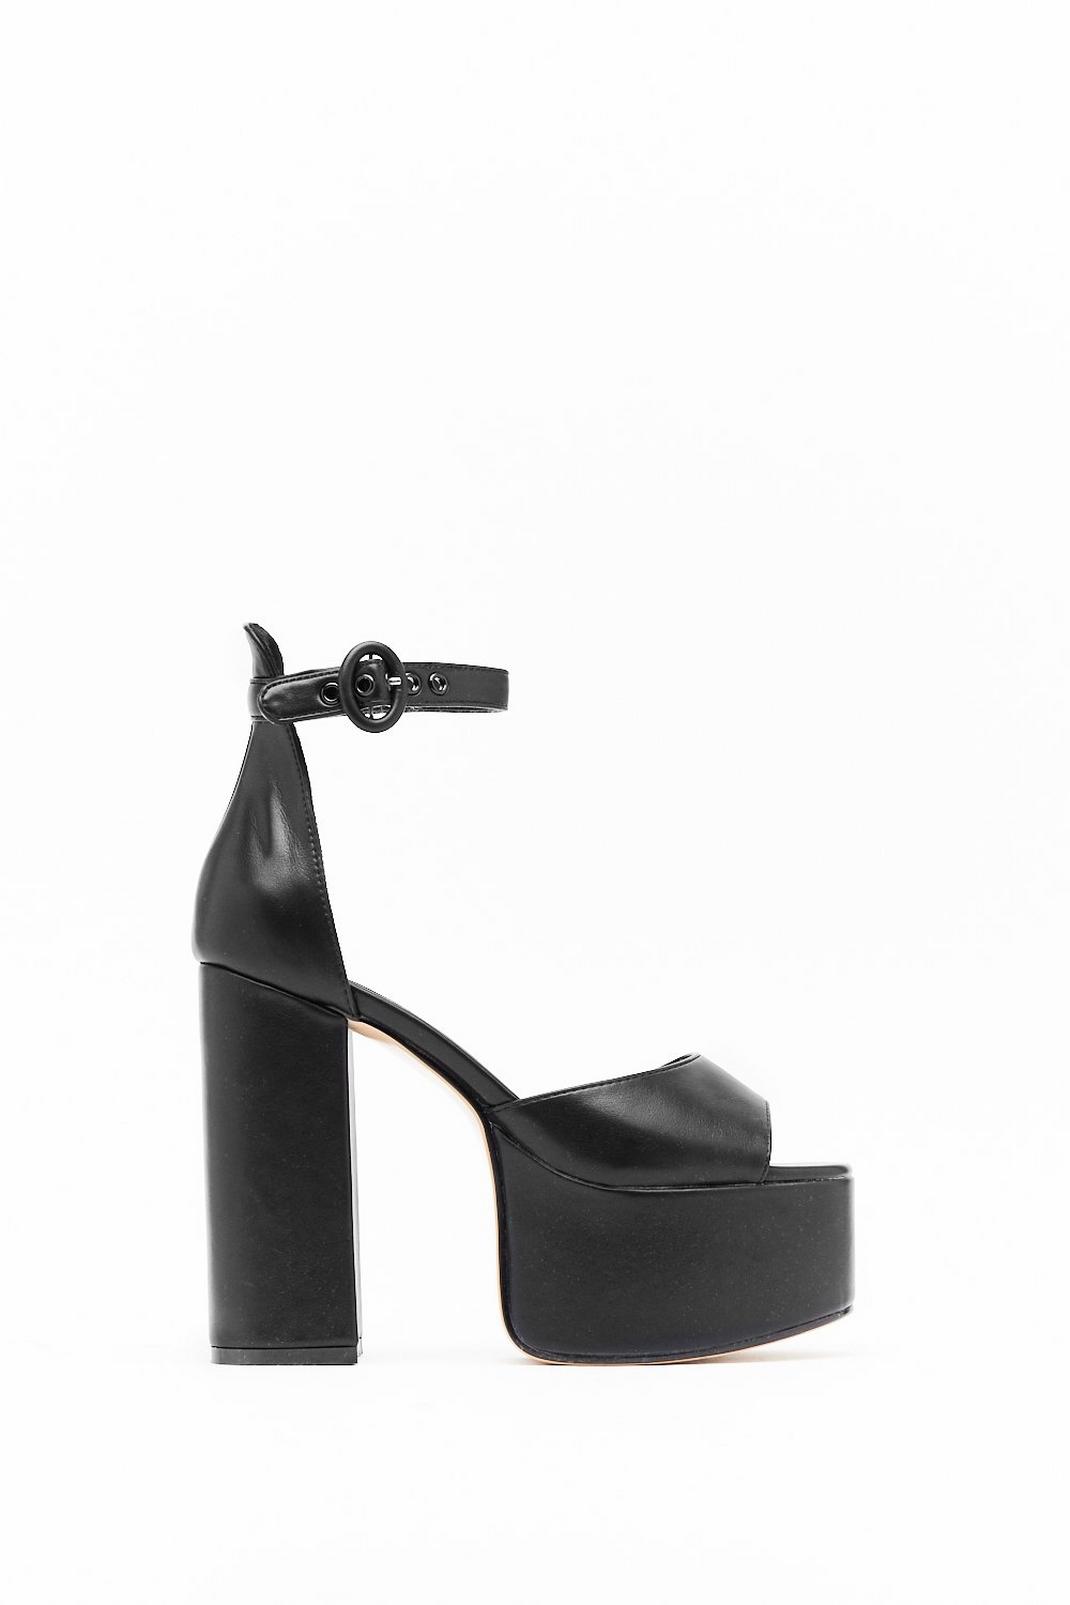 Rise to the Top Faux Leather Platform Heels | Nasty Gal